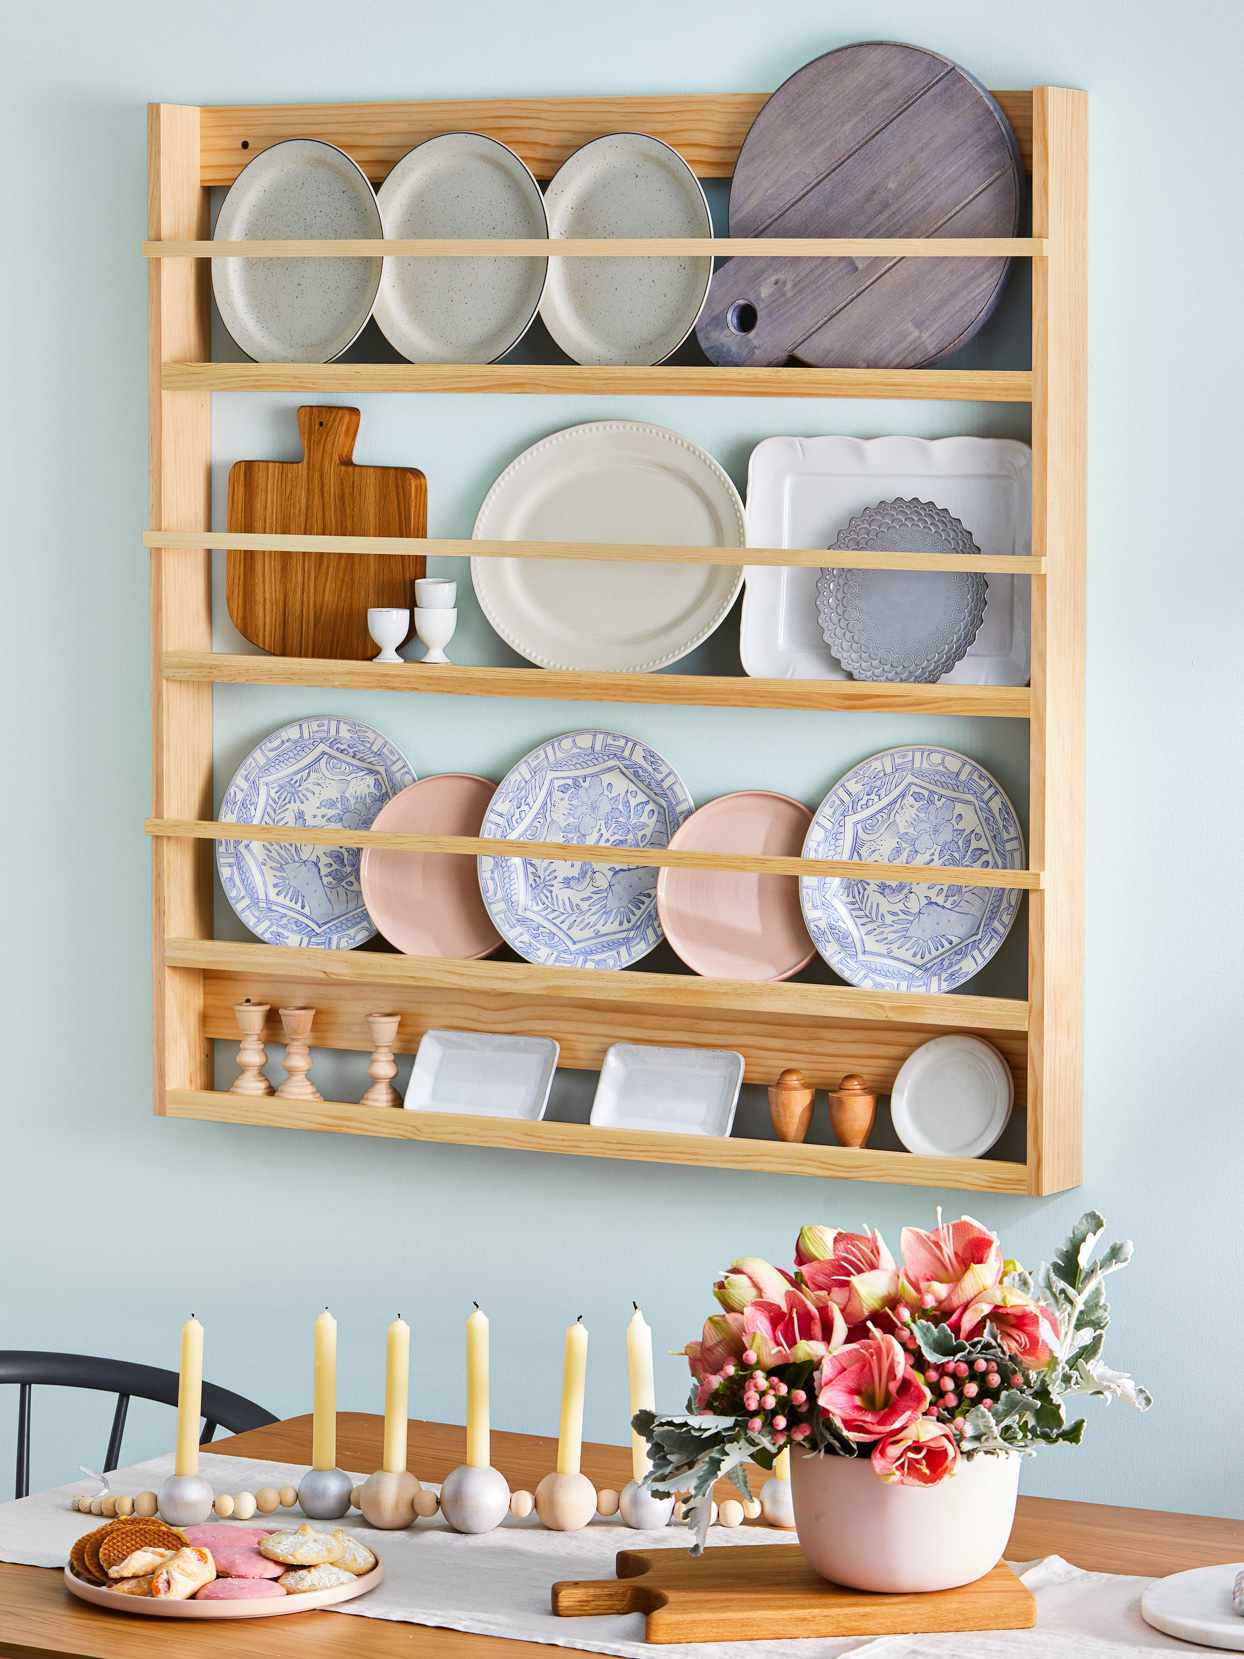 Showcase Your Favorite Dishware With This Easy Diy Plate Rack Better Homes Gardens